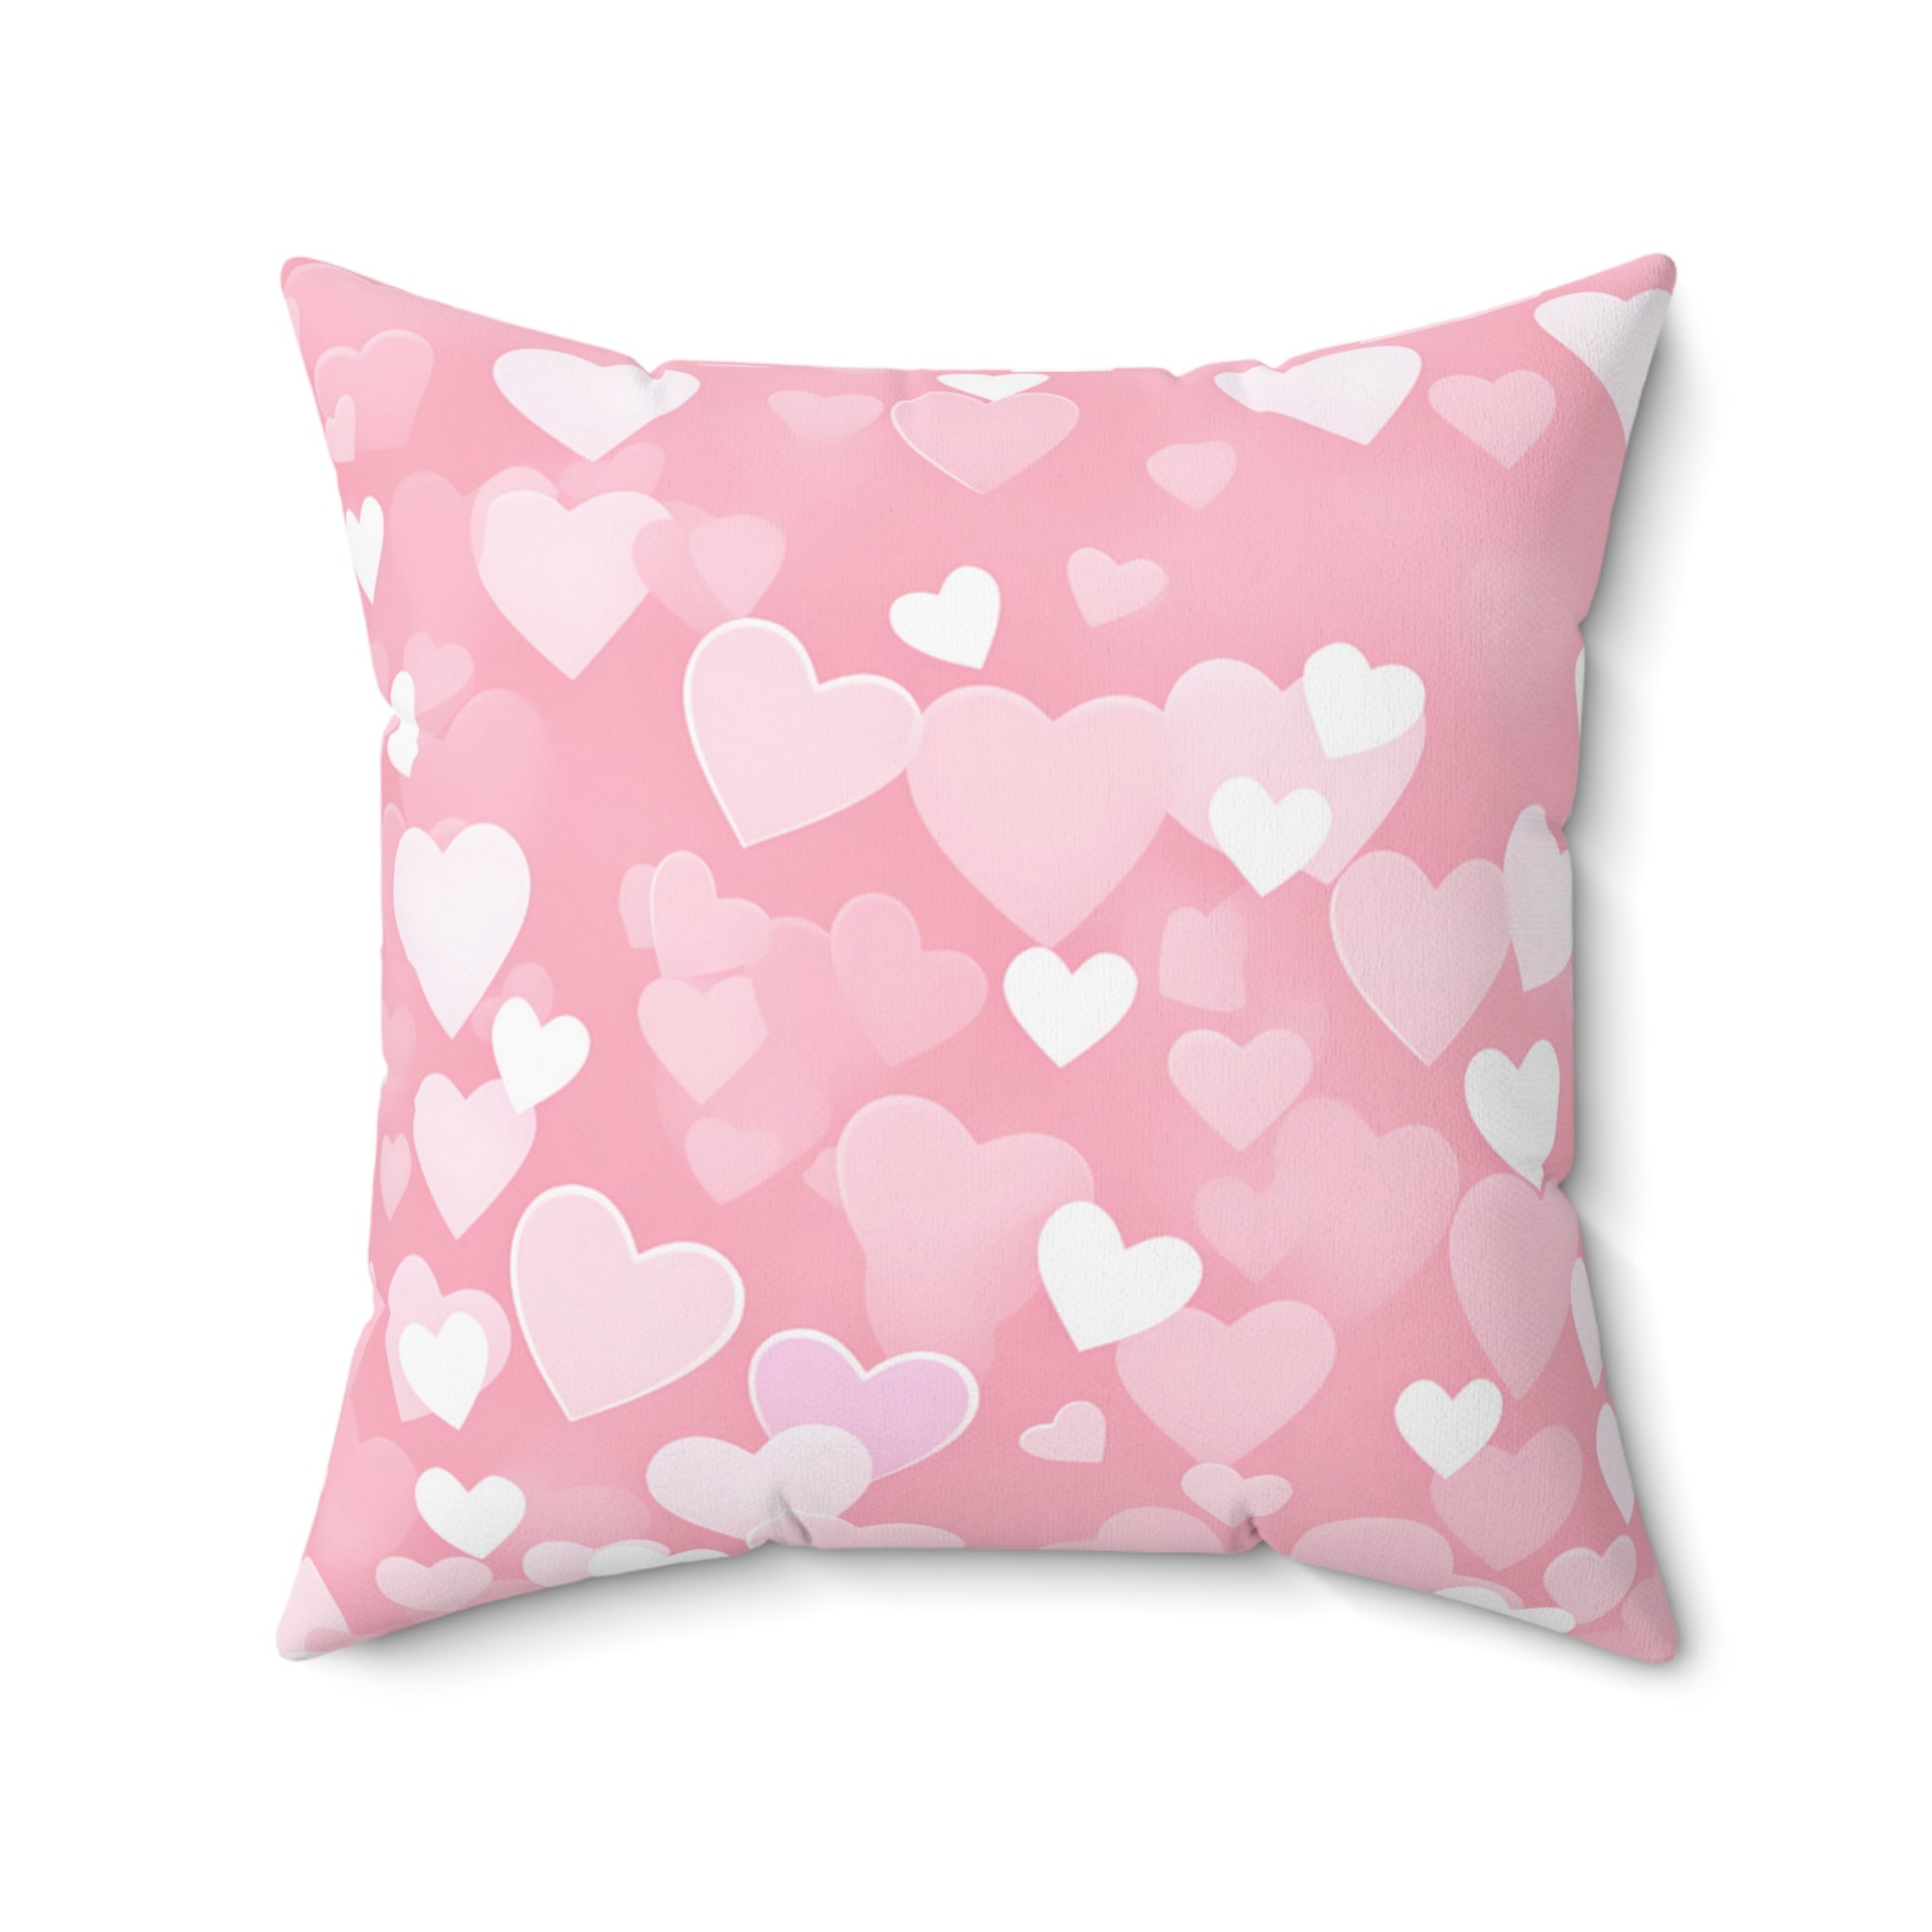 Spun Polyester Square Pillow with light pink hearts